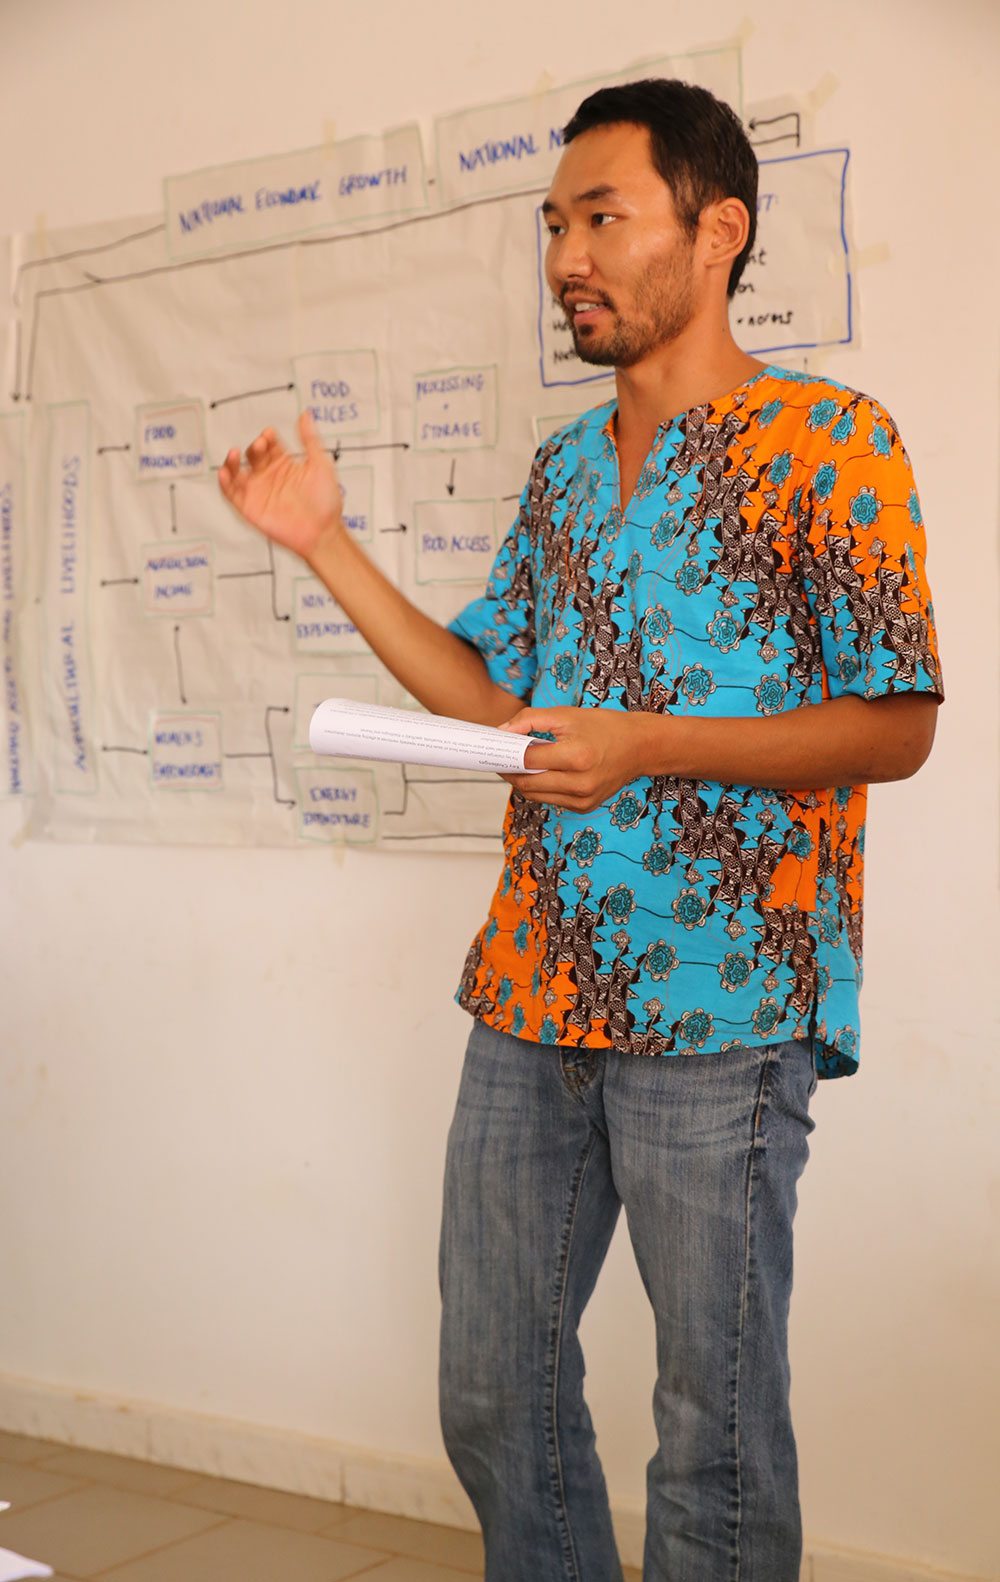 Peace Corps volunteer, Justin, shares his group’s work and connects his group’s section of the nutrition assessment to the agriculture to nutrition pathways.